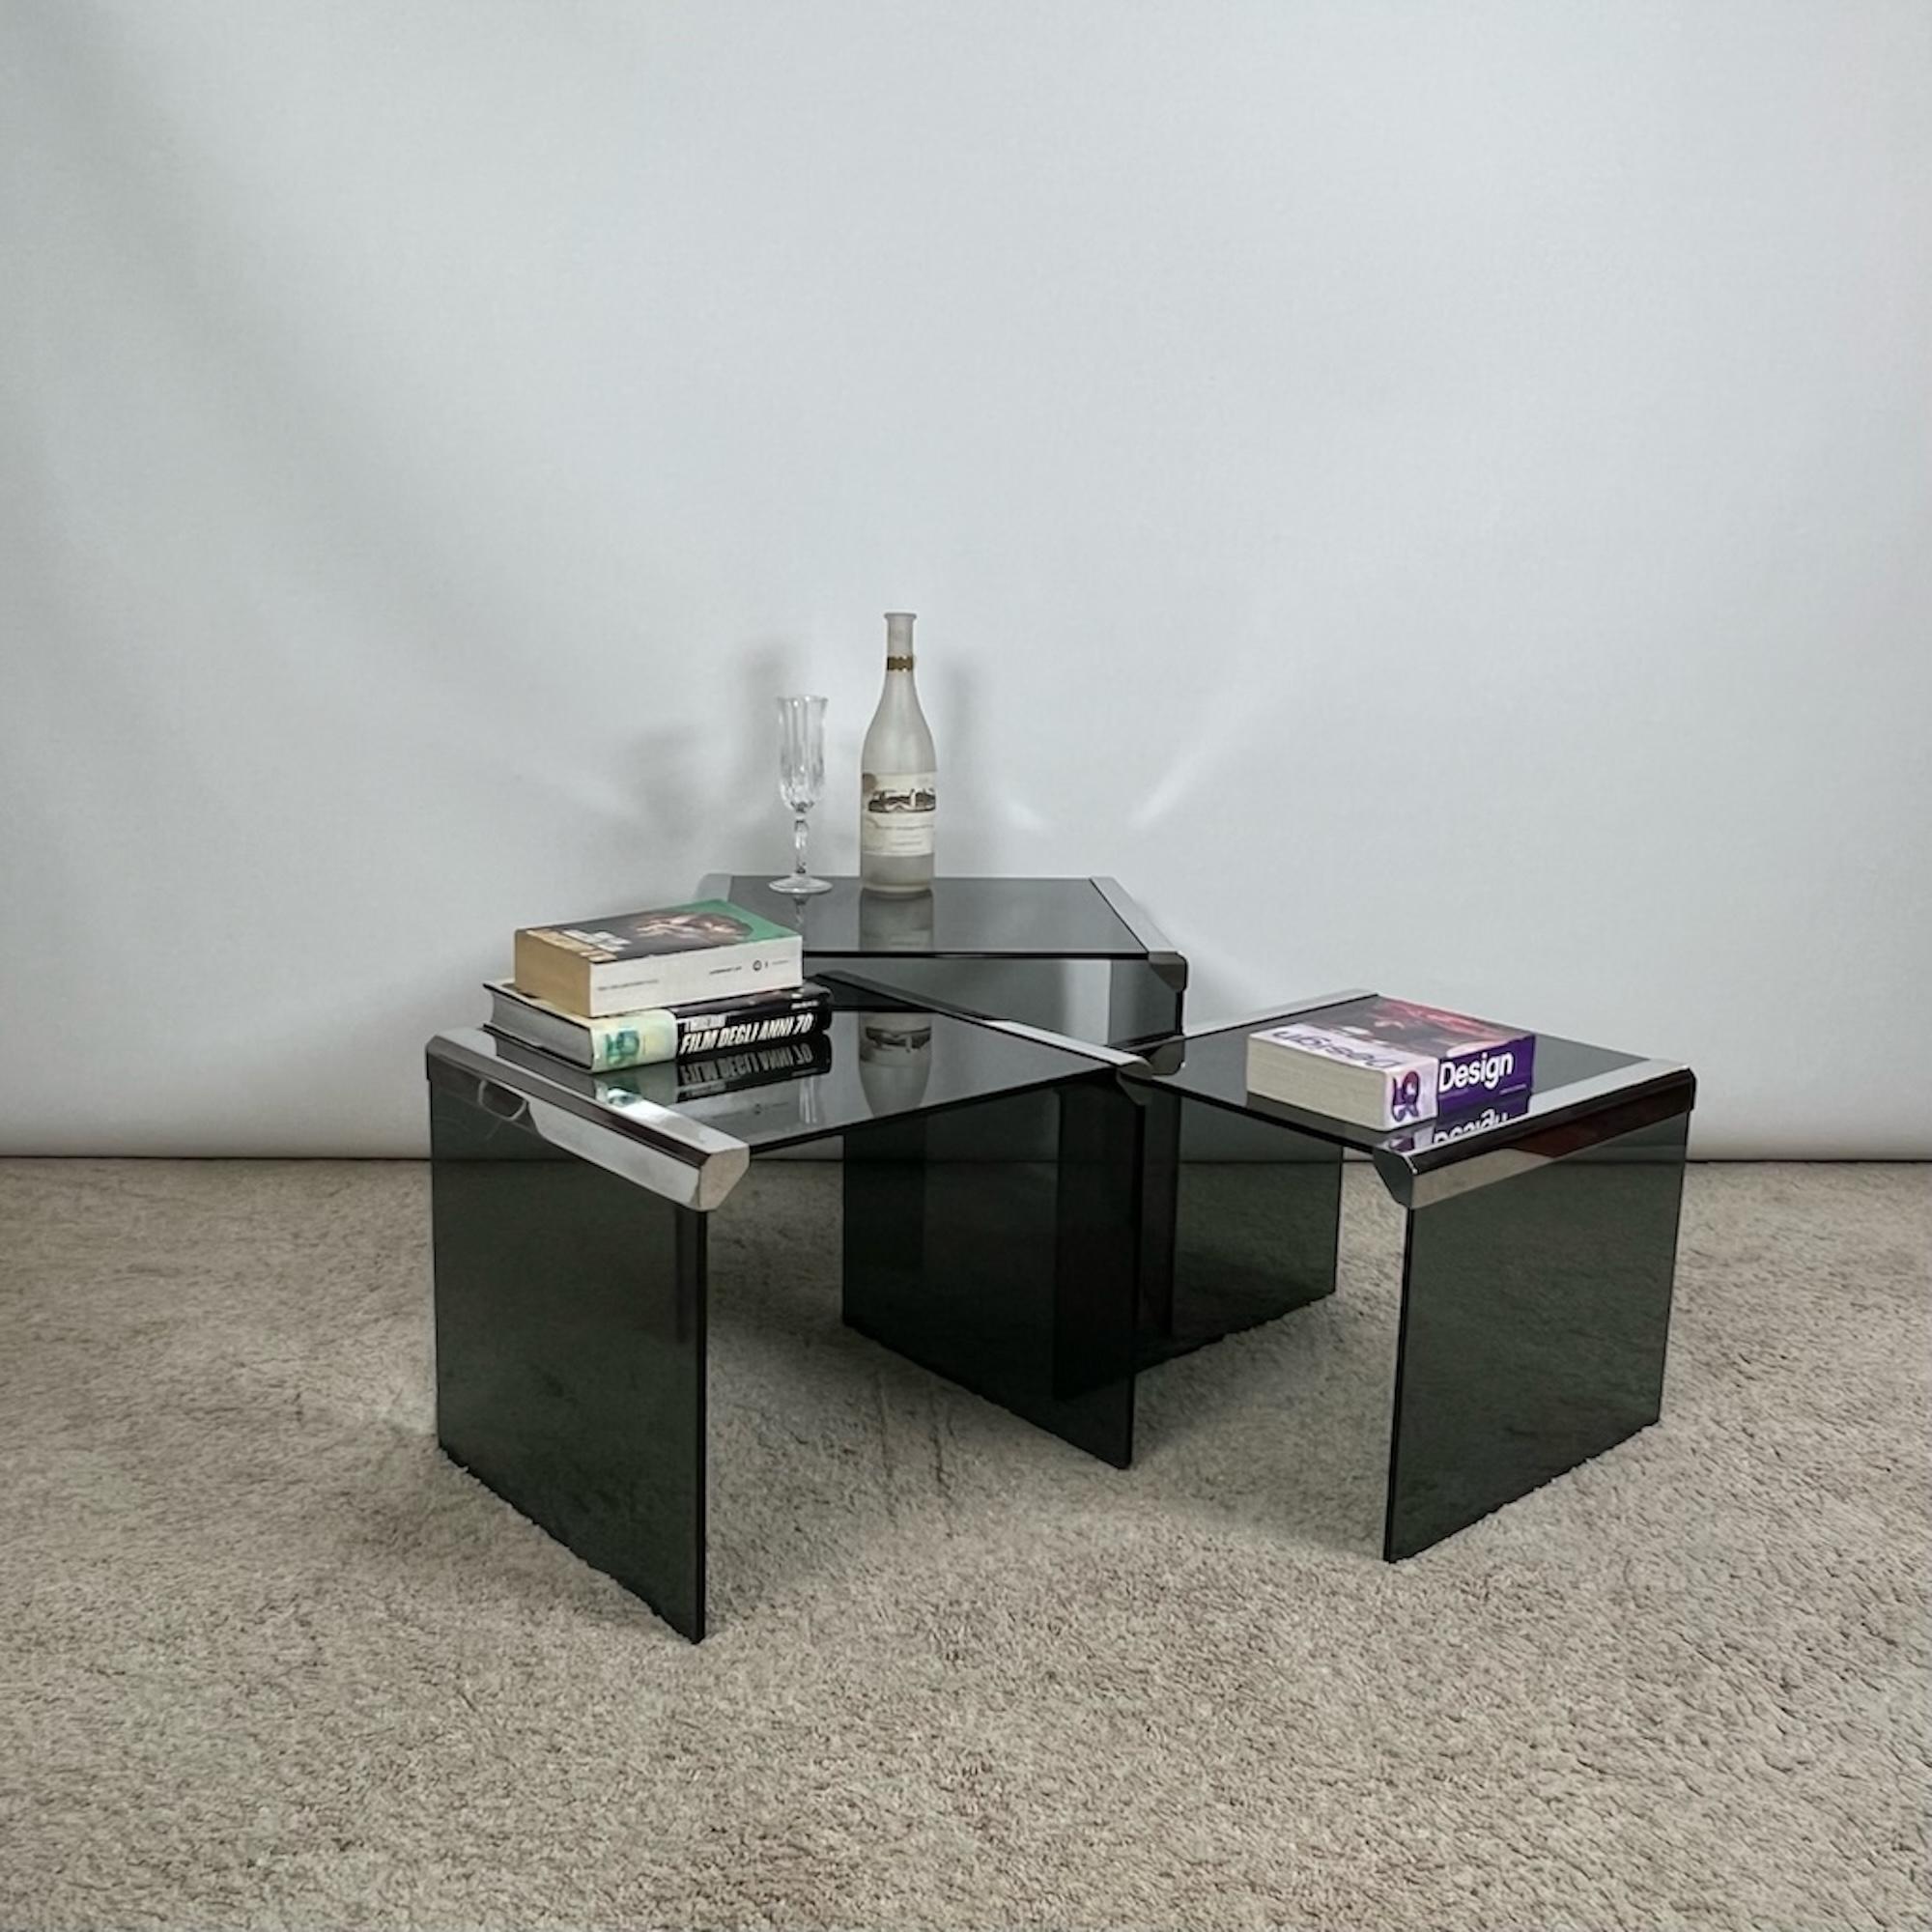 Beautiful set of three nesting tables designed by Pierangelo Gallotti in 1975 and manufactured by Gallotti & Radice in the 70s.

This iconic tables are made of ultra thick fume gray crystal with chrome metal details.

In the typical Hollywood